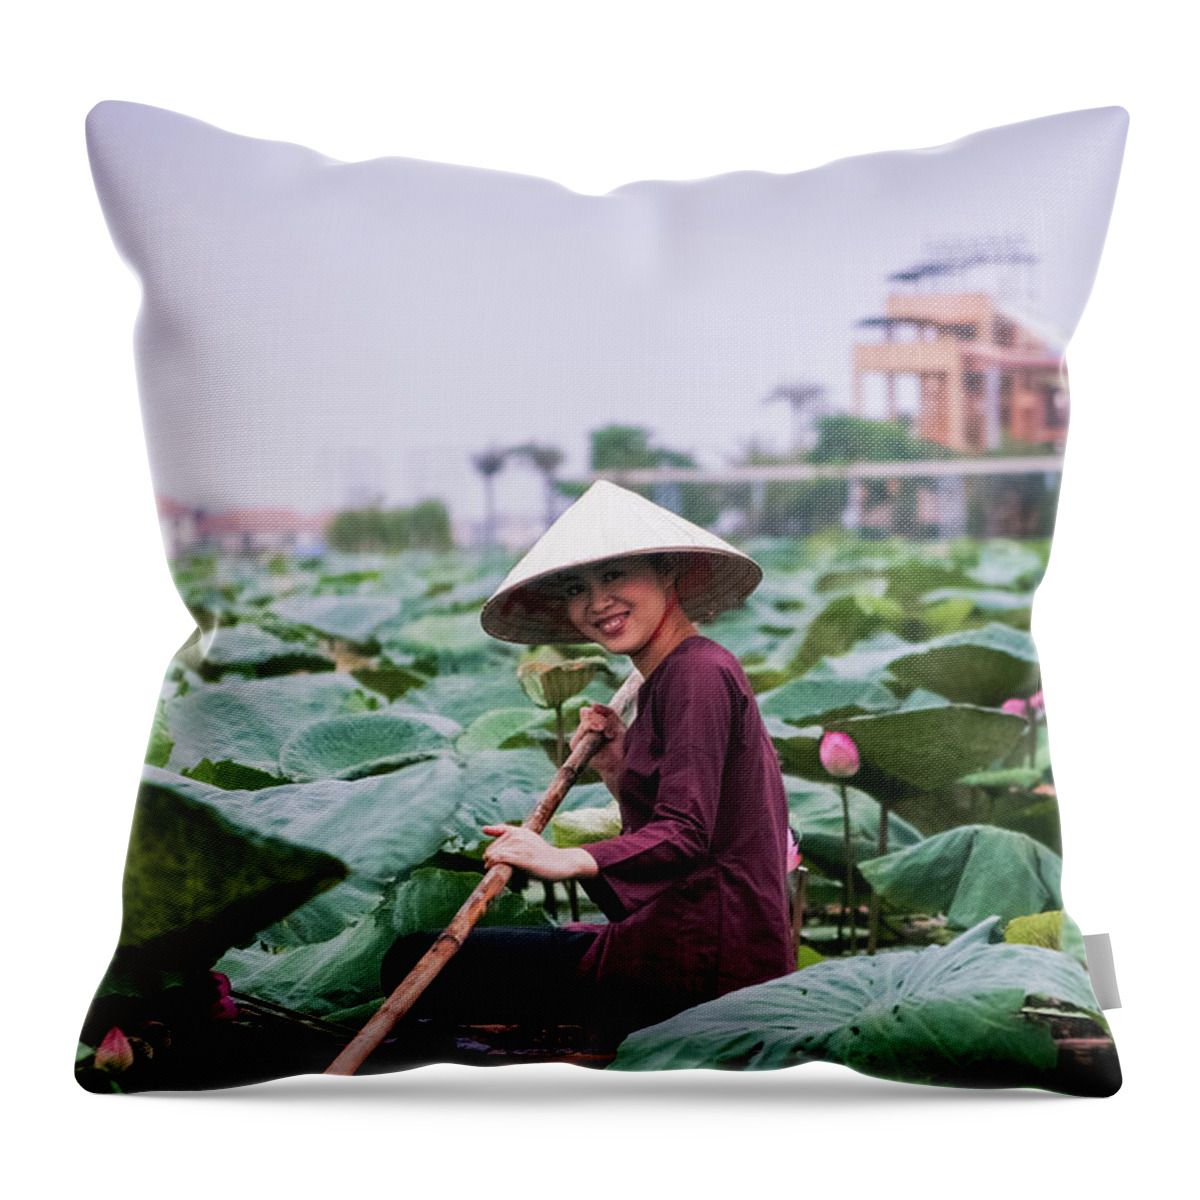 Working Throw Pillow featuring the photograph Lotus Flower Harvesting - Hanoi, Vietnam by 117 Imagery